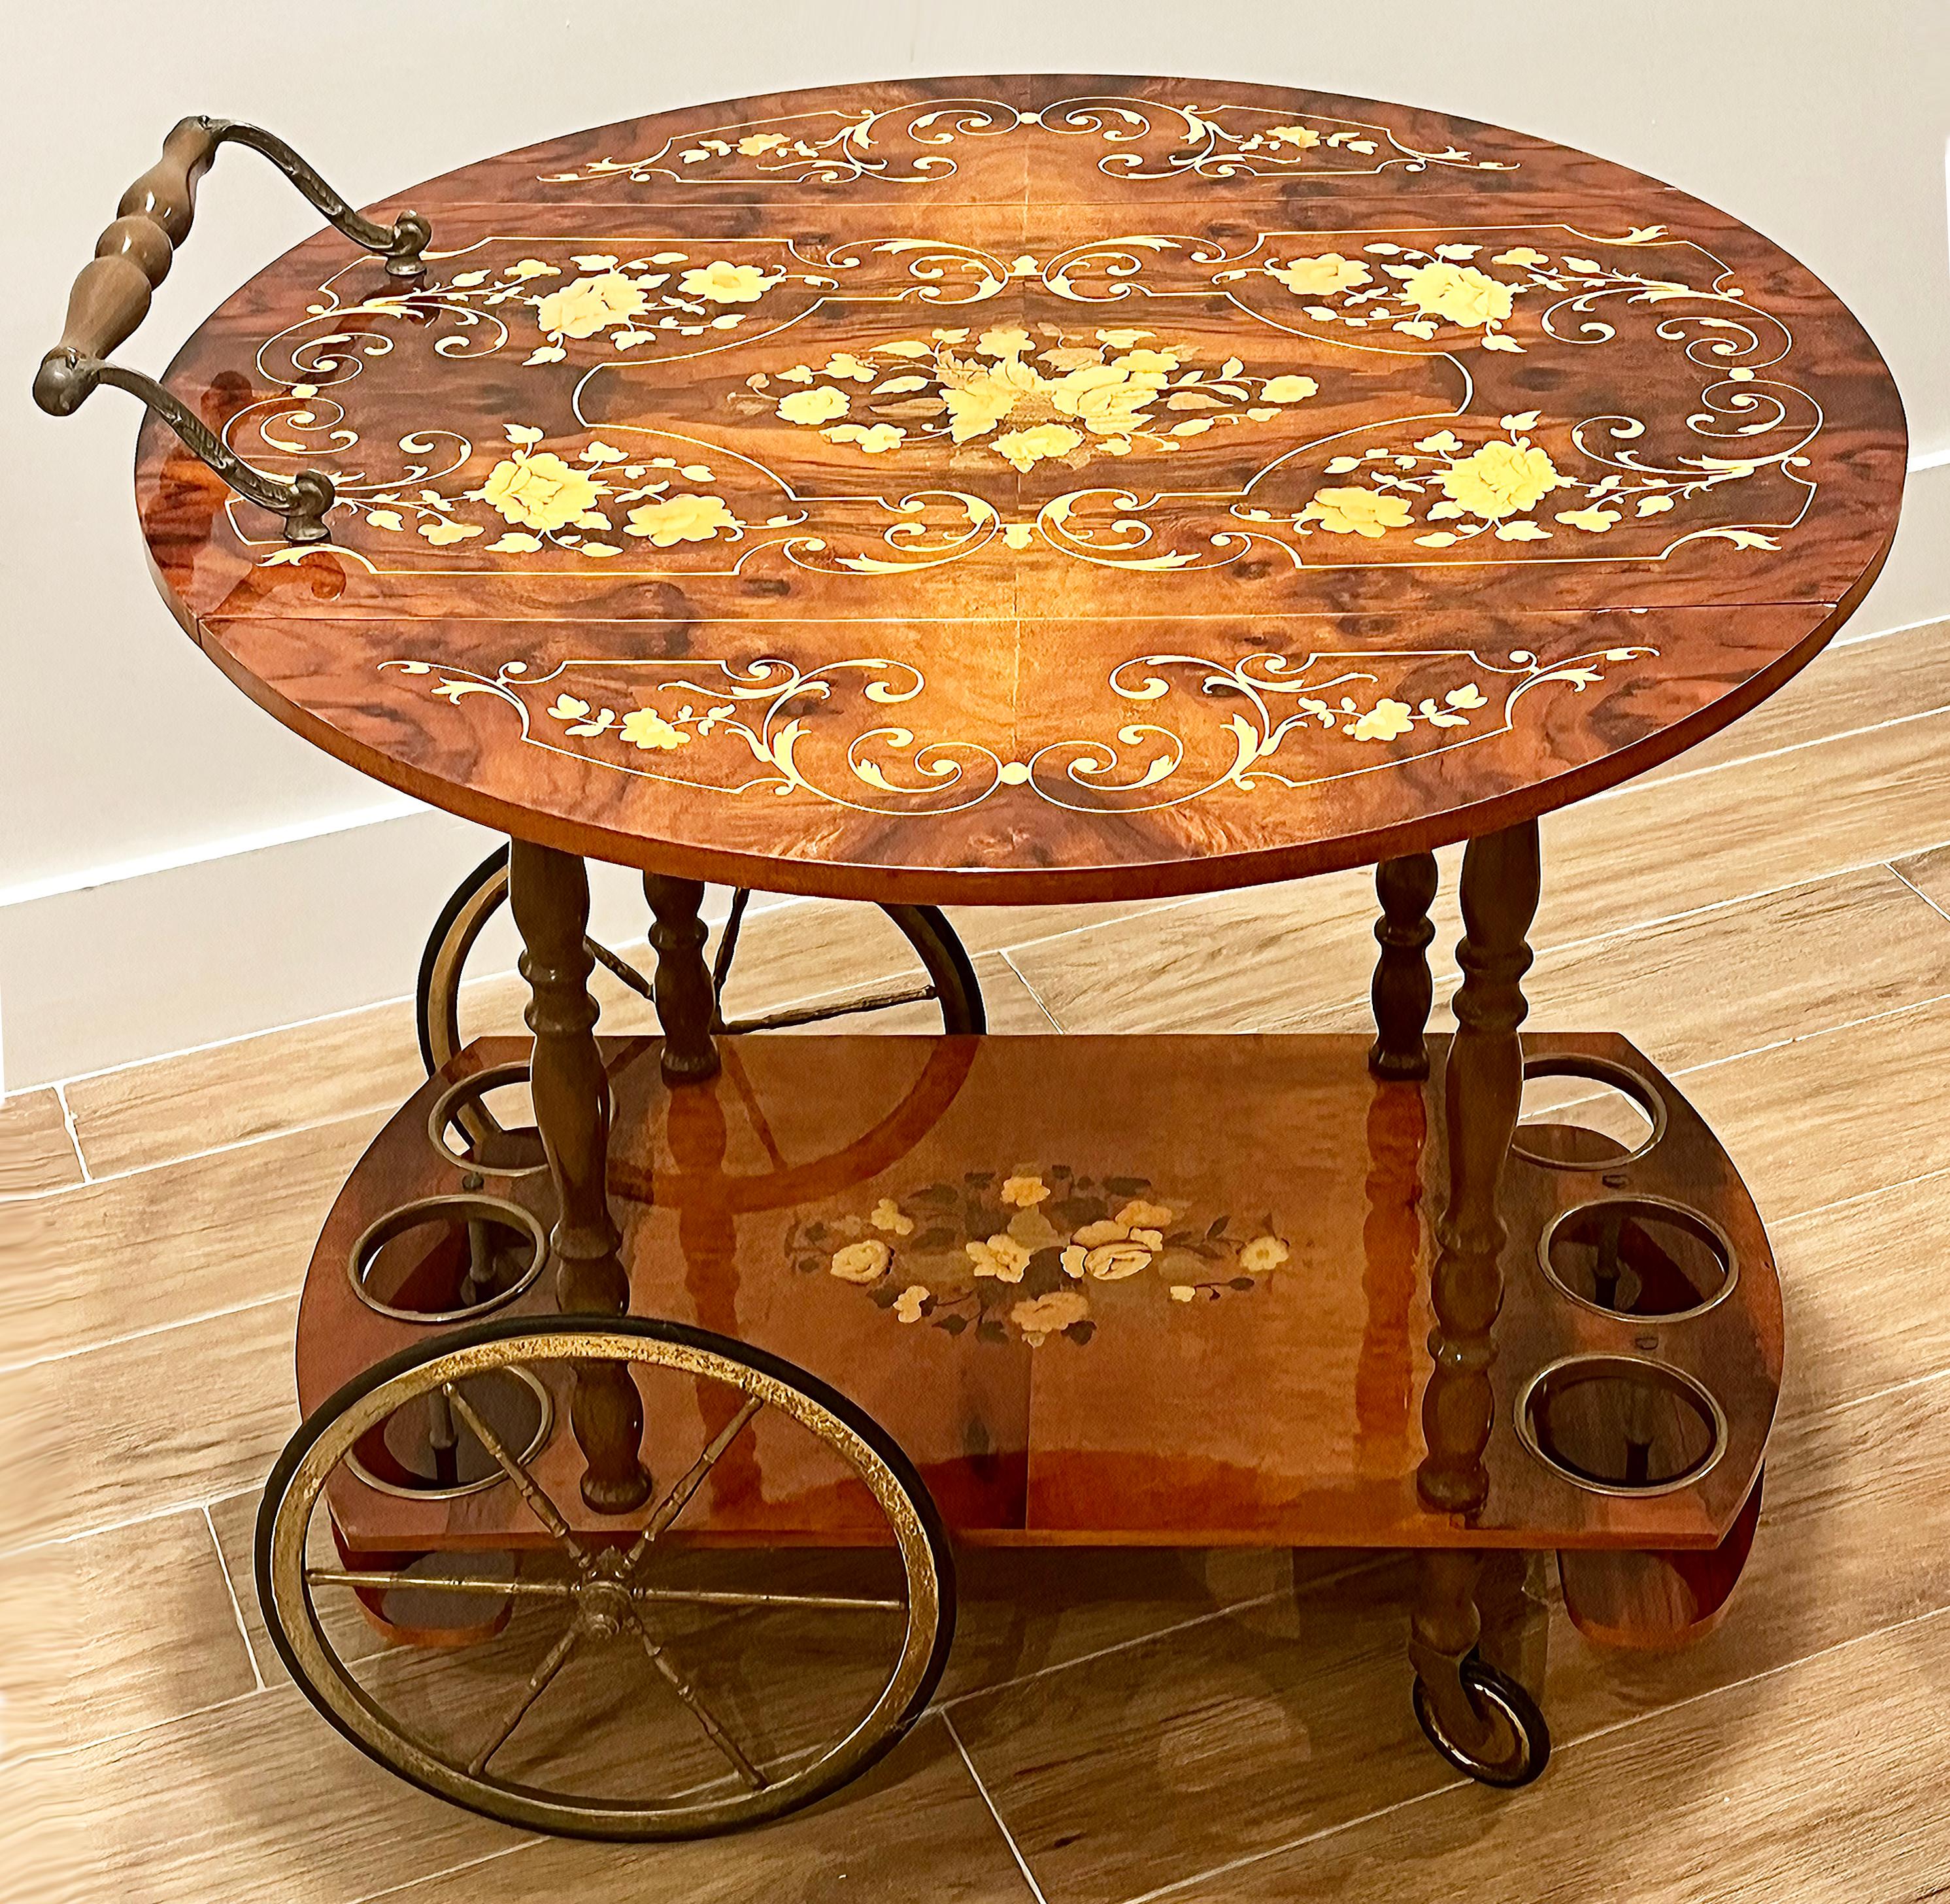 Vintage Italian Floral Inlay Rolling Bar Tea Cart, Drop Leaf Sides

Offered for sale is an Italian floral inlay marquetry bar cart with drop leaves that can be raised and locked to extend the top.  The cart has brass hardware, a wooden handle, and